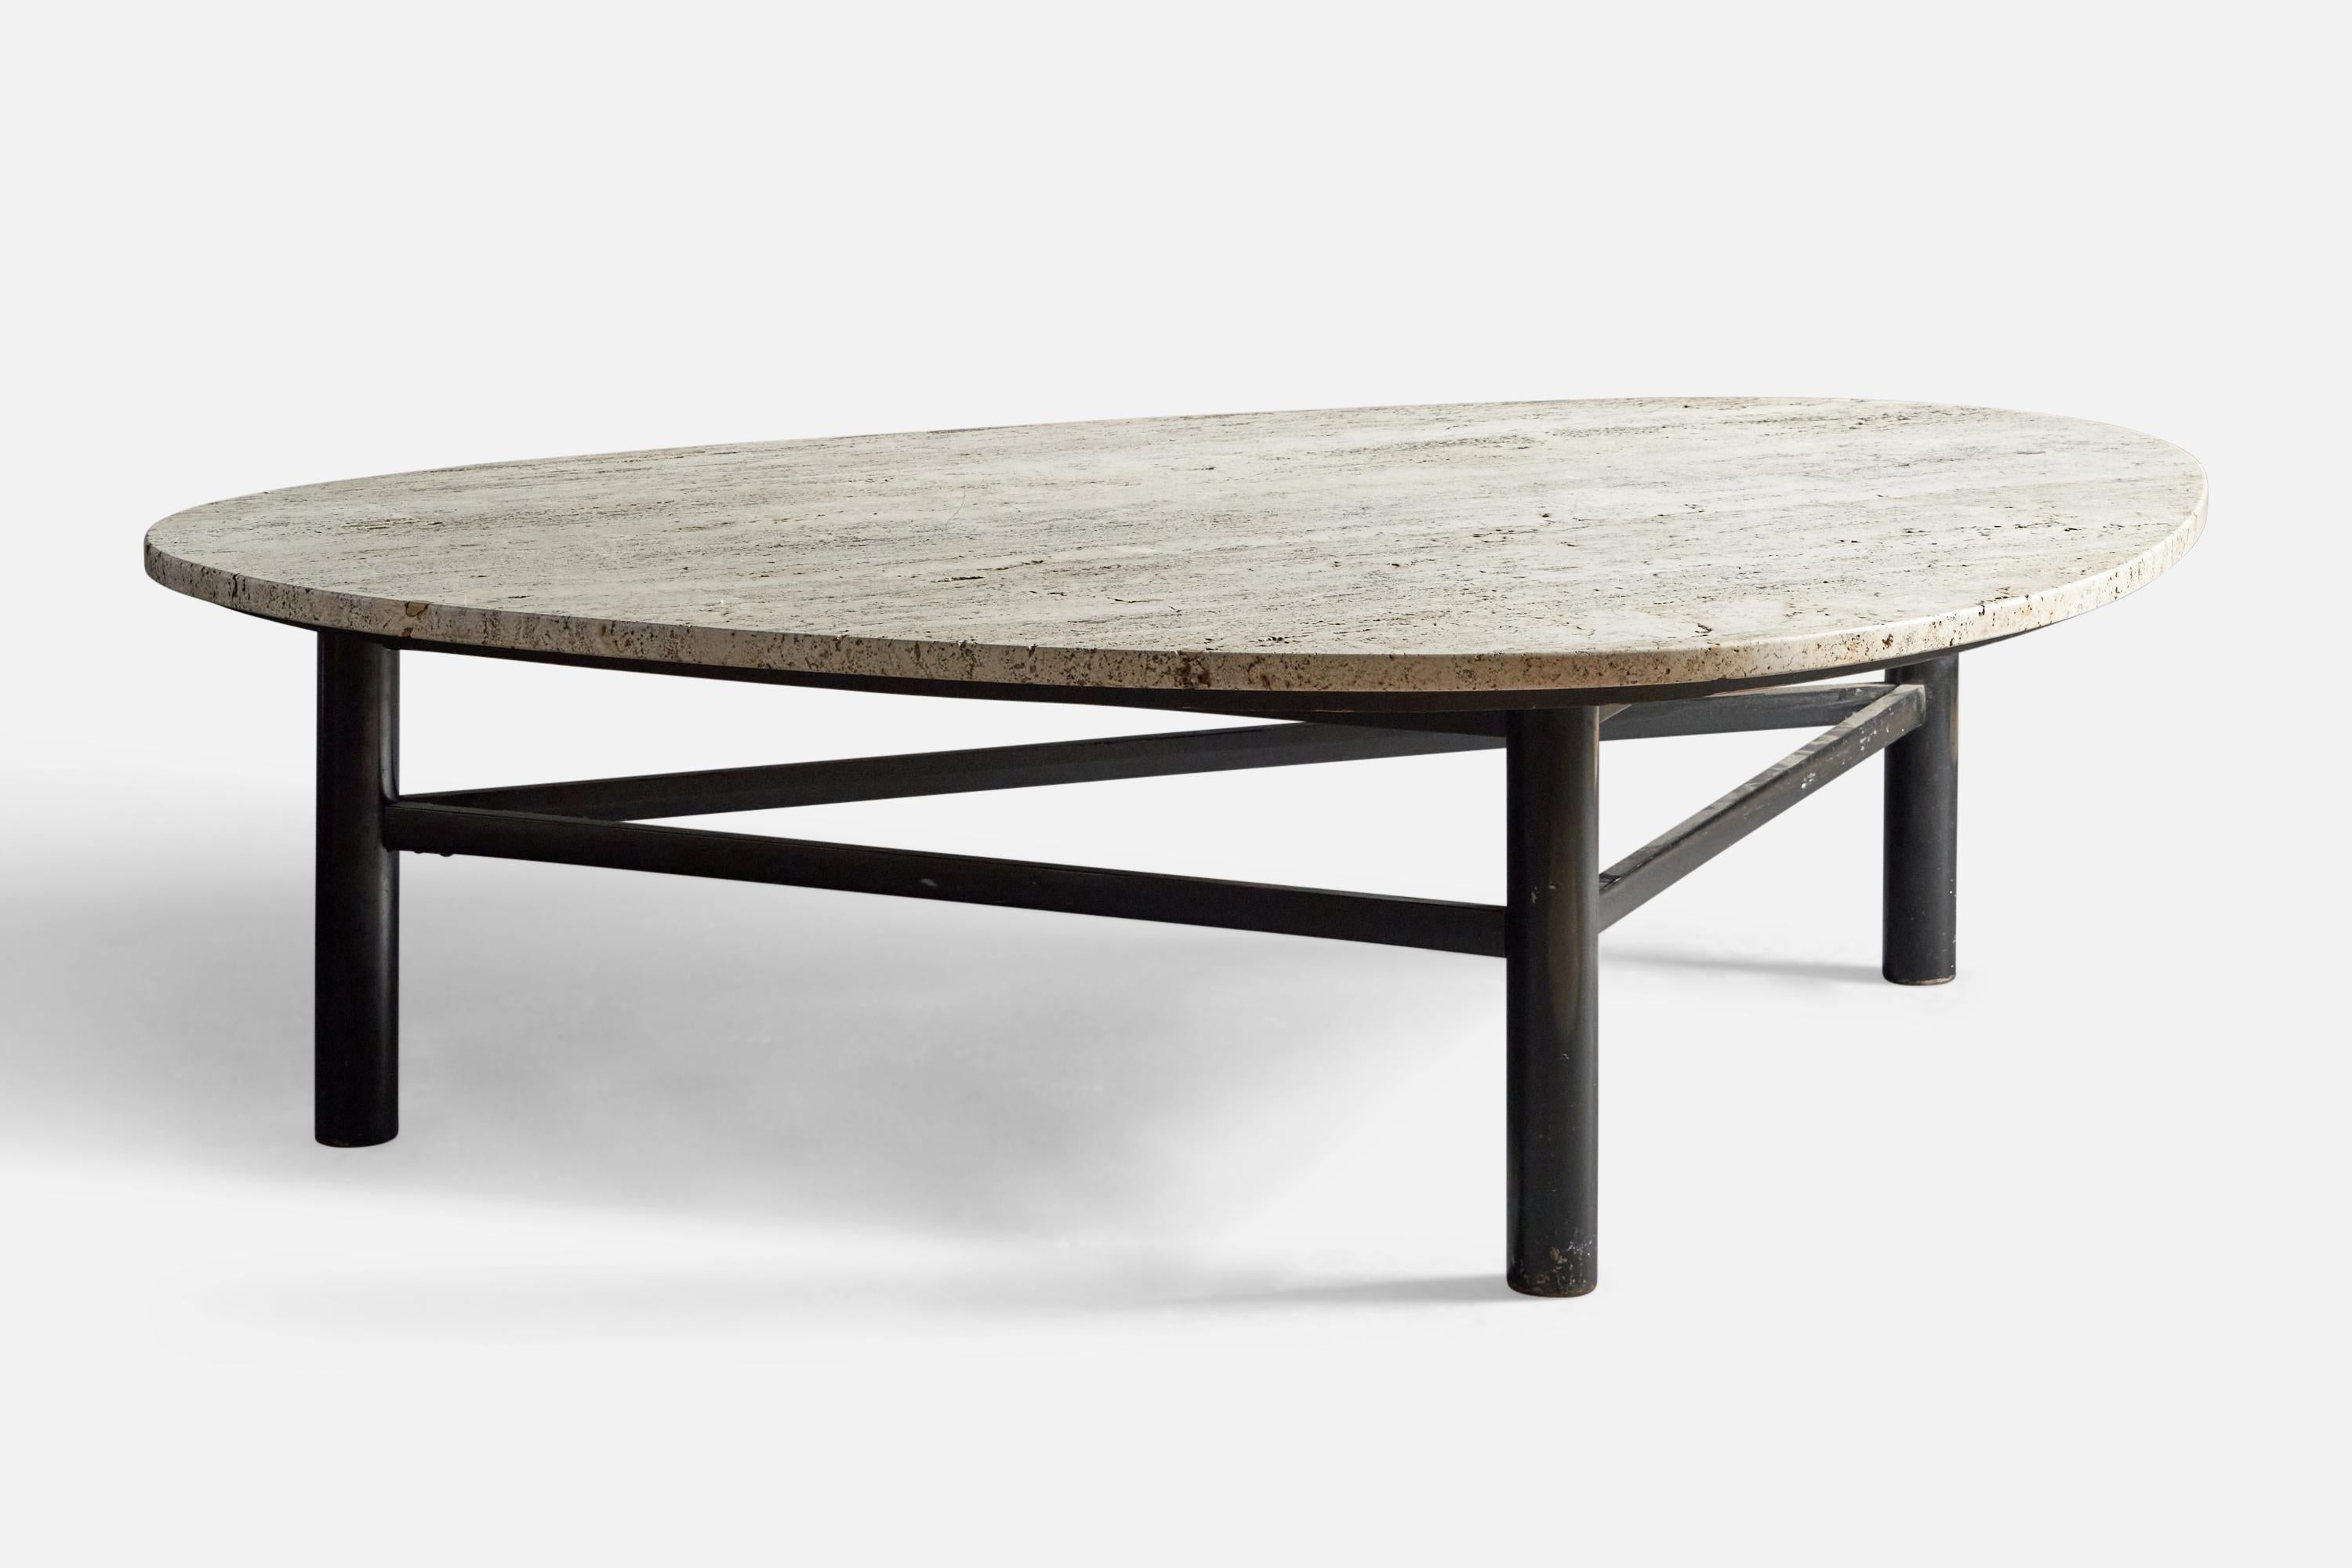 A marble and black-lacquered wood coffee or cocktail table, designed and produced in the USA, 1950s.